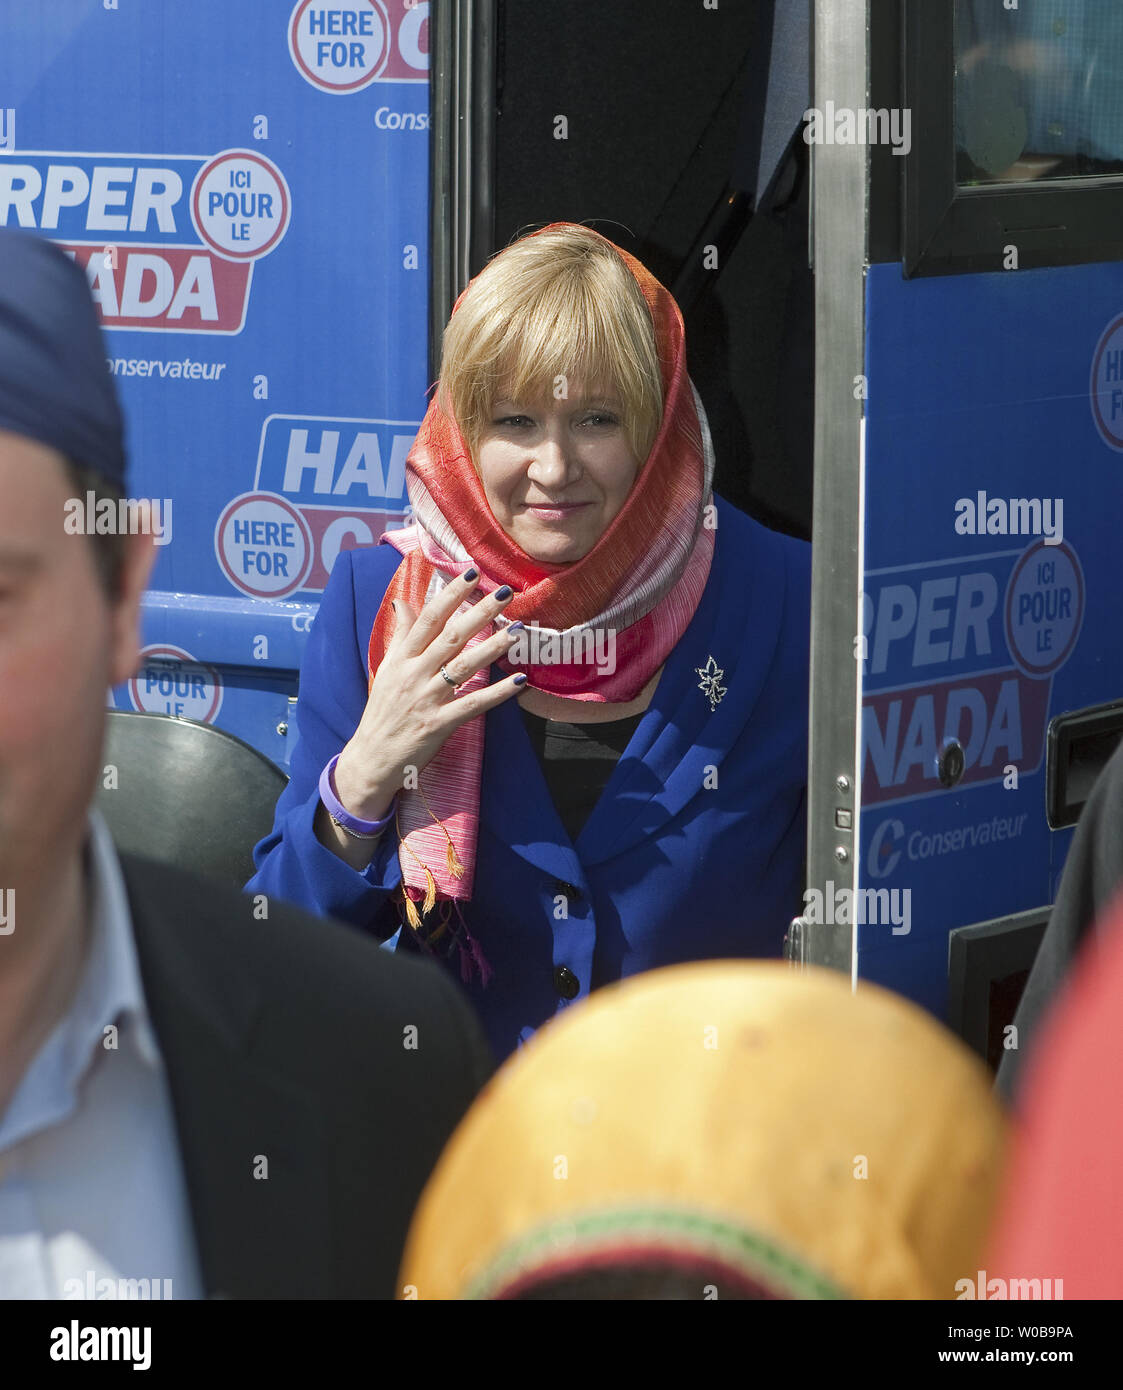 https://c8.alamy.com/comp/W0B9PA/laureen-the-wife-of-canadas-conservative-prime-minister-stephen-harper-gets-off-the-campaign-bus-to-join-her-husband-as-they-visit-vaisaikhi-celebrations-on-a-2011-federal-election-campaign-stop-in-vancouver-british-columbia-april-16-2011-harper-is-making-a-strategic-stop-in-the-swing-riding-of-vancouver-south-to-support-conservative-candidate-wai-young-who-lost-to-liberal-mp-ujjal-dosanijh-by-20-votes-in-the-longest-recount-in-canadian-history-after-the-last-federal-election-upiheinz-ruckemann-W0B9PA.jpg